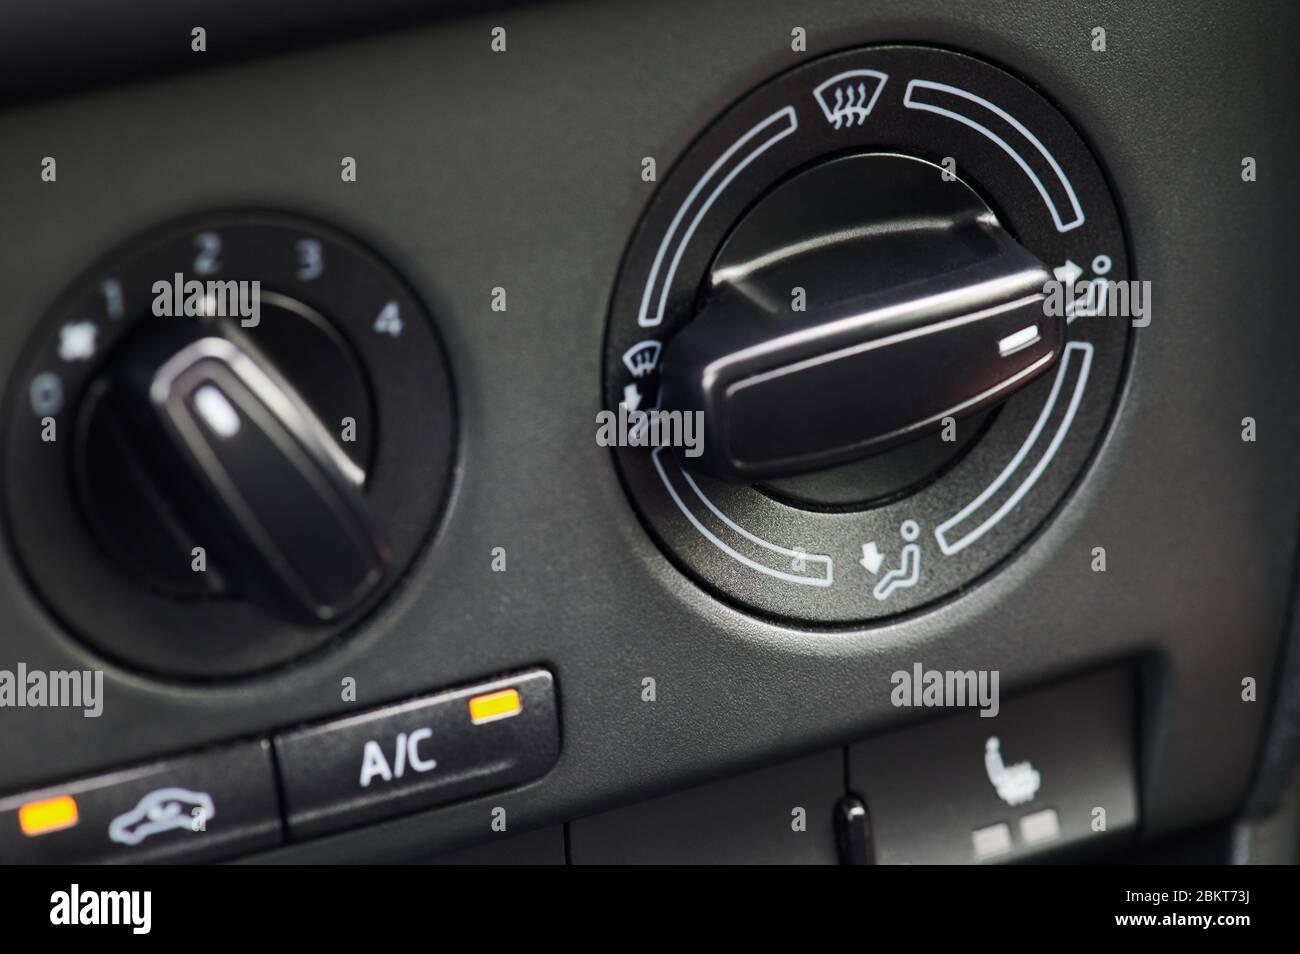 Climate control in modern car macro close up view Stock Photo